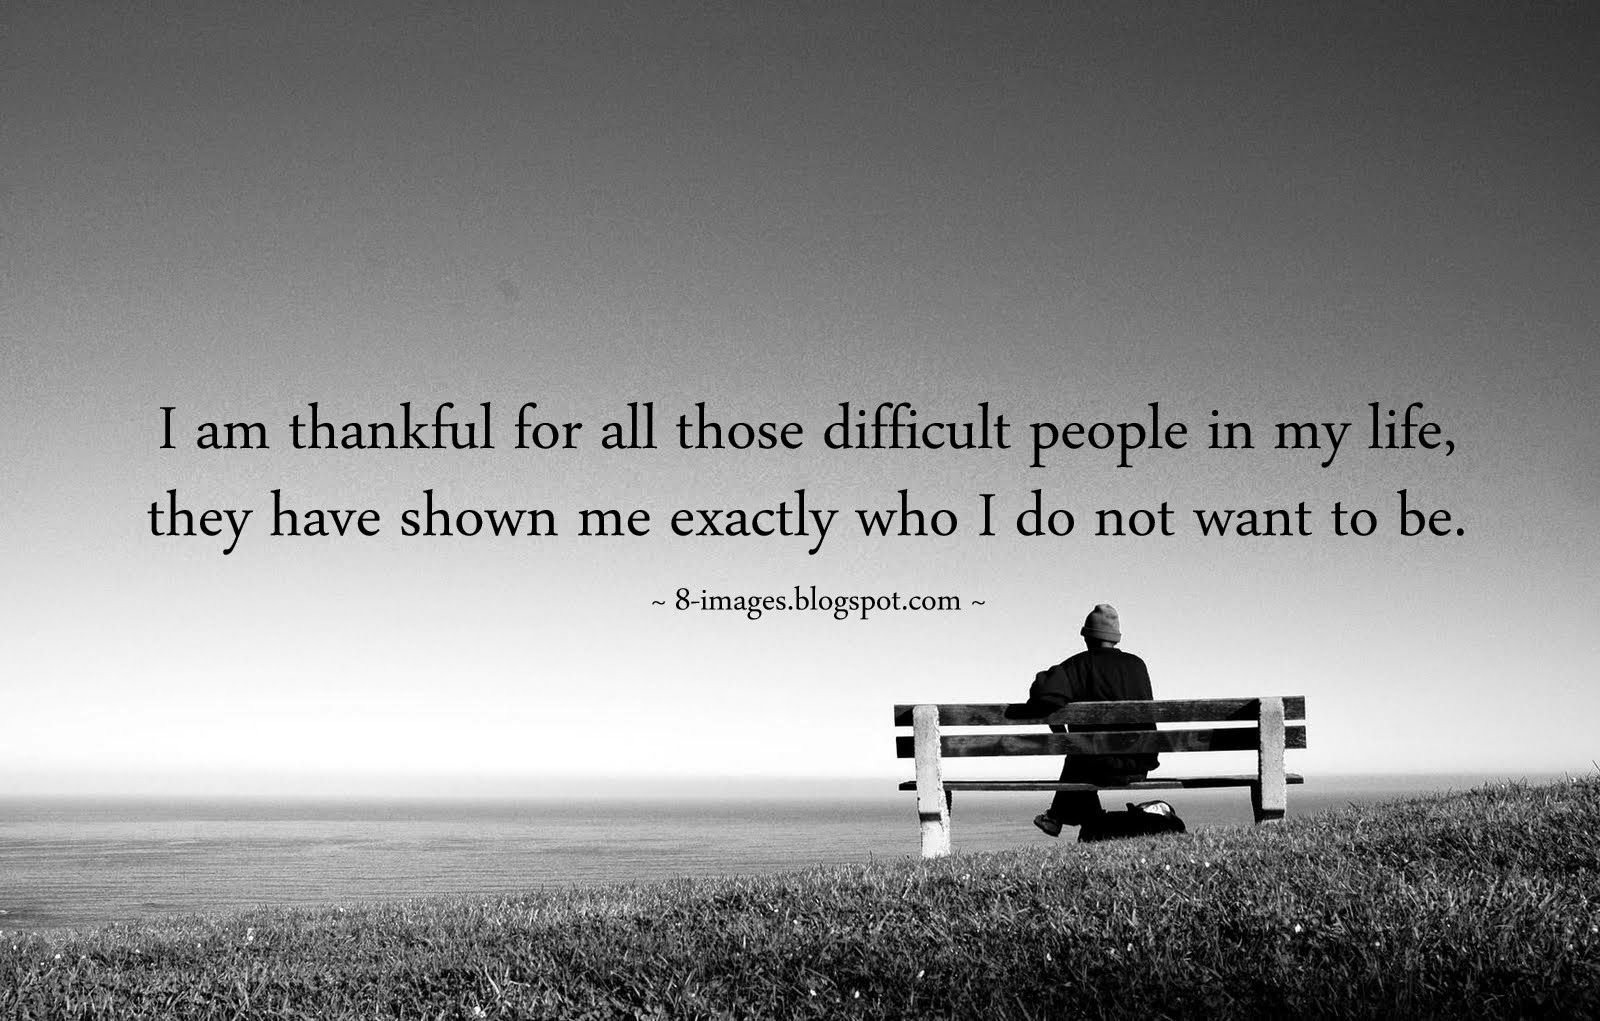 I am thankful for all those difficult people in my life